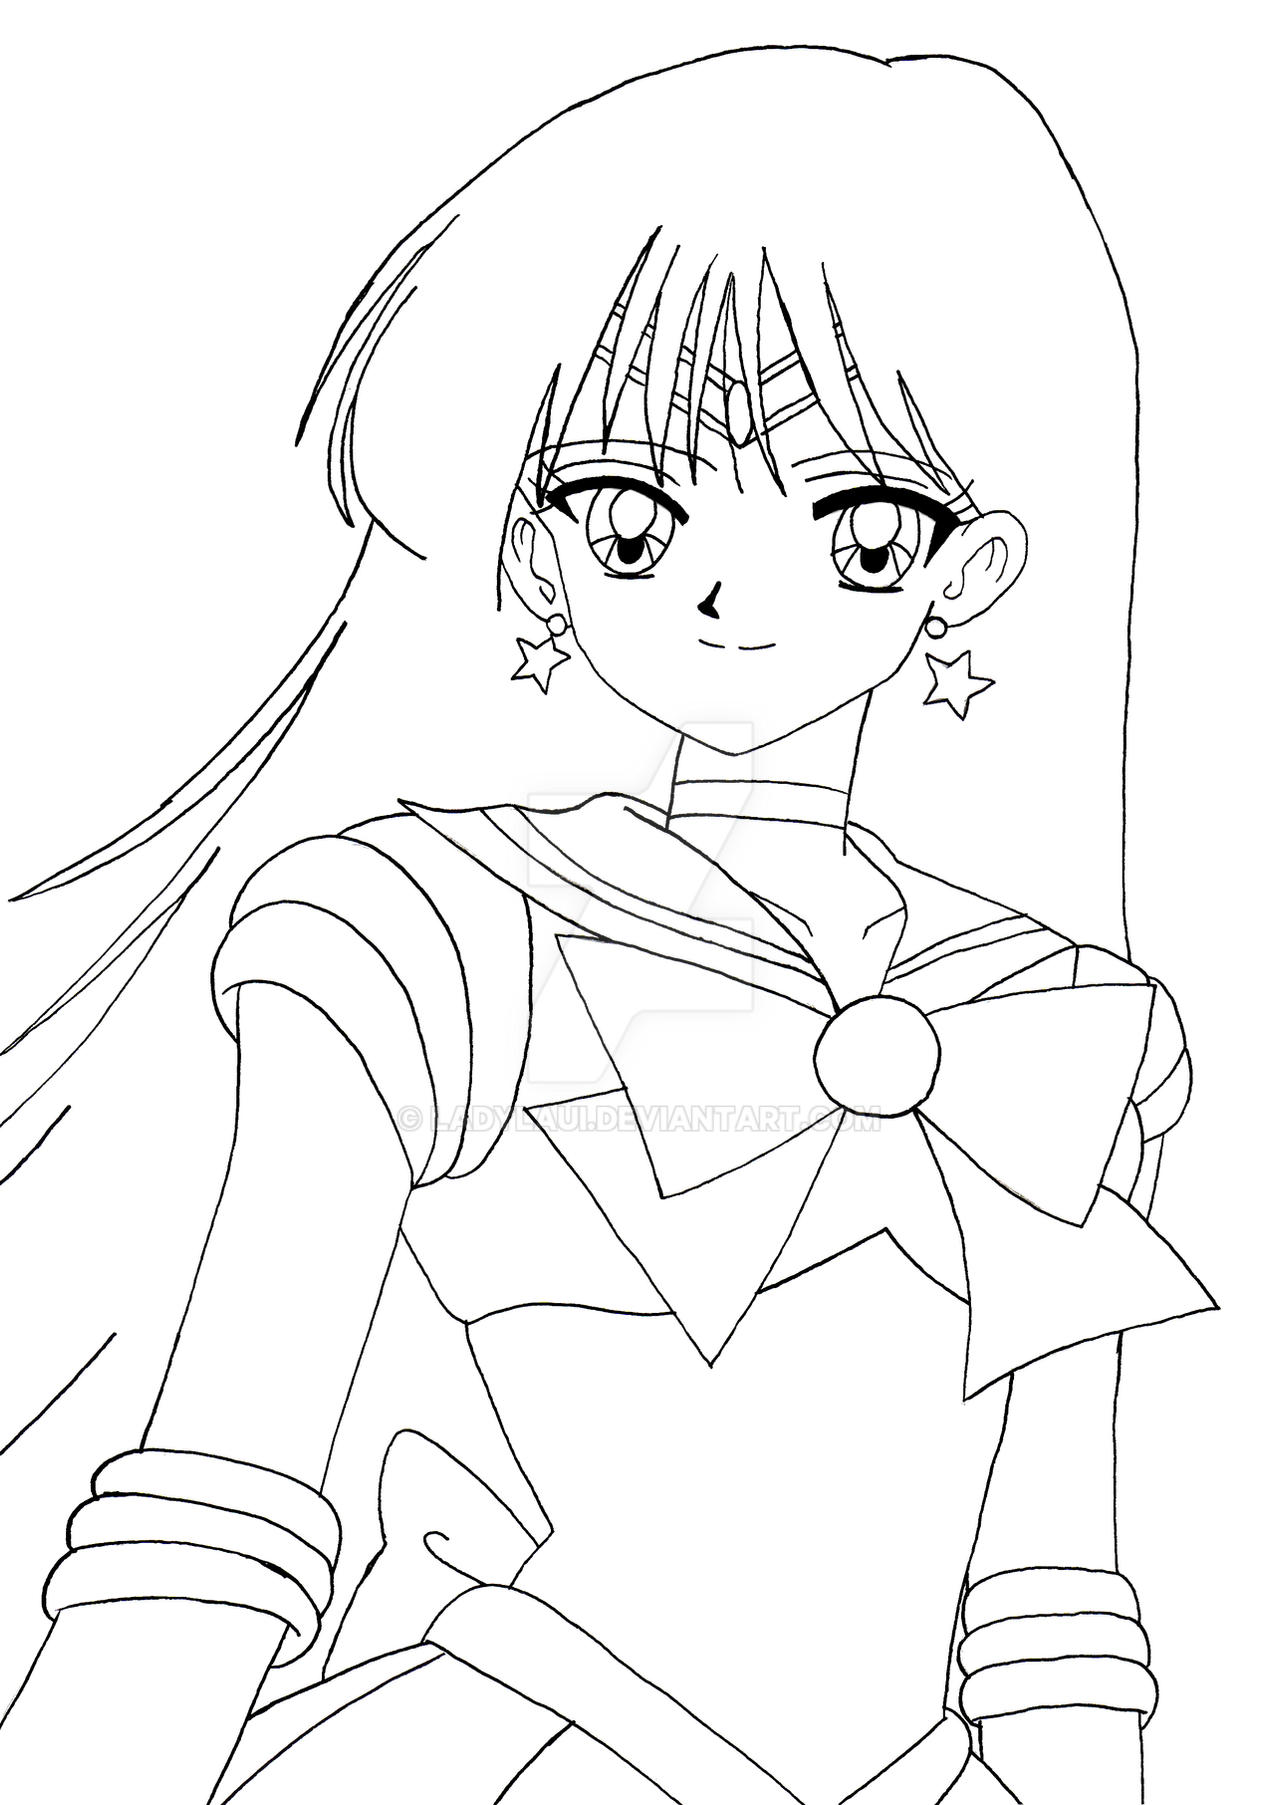 Lineart Sailor Mars first form